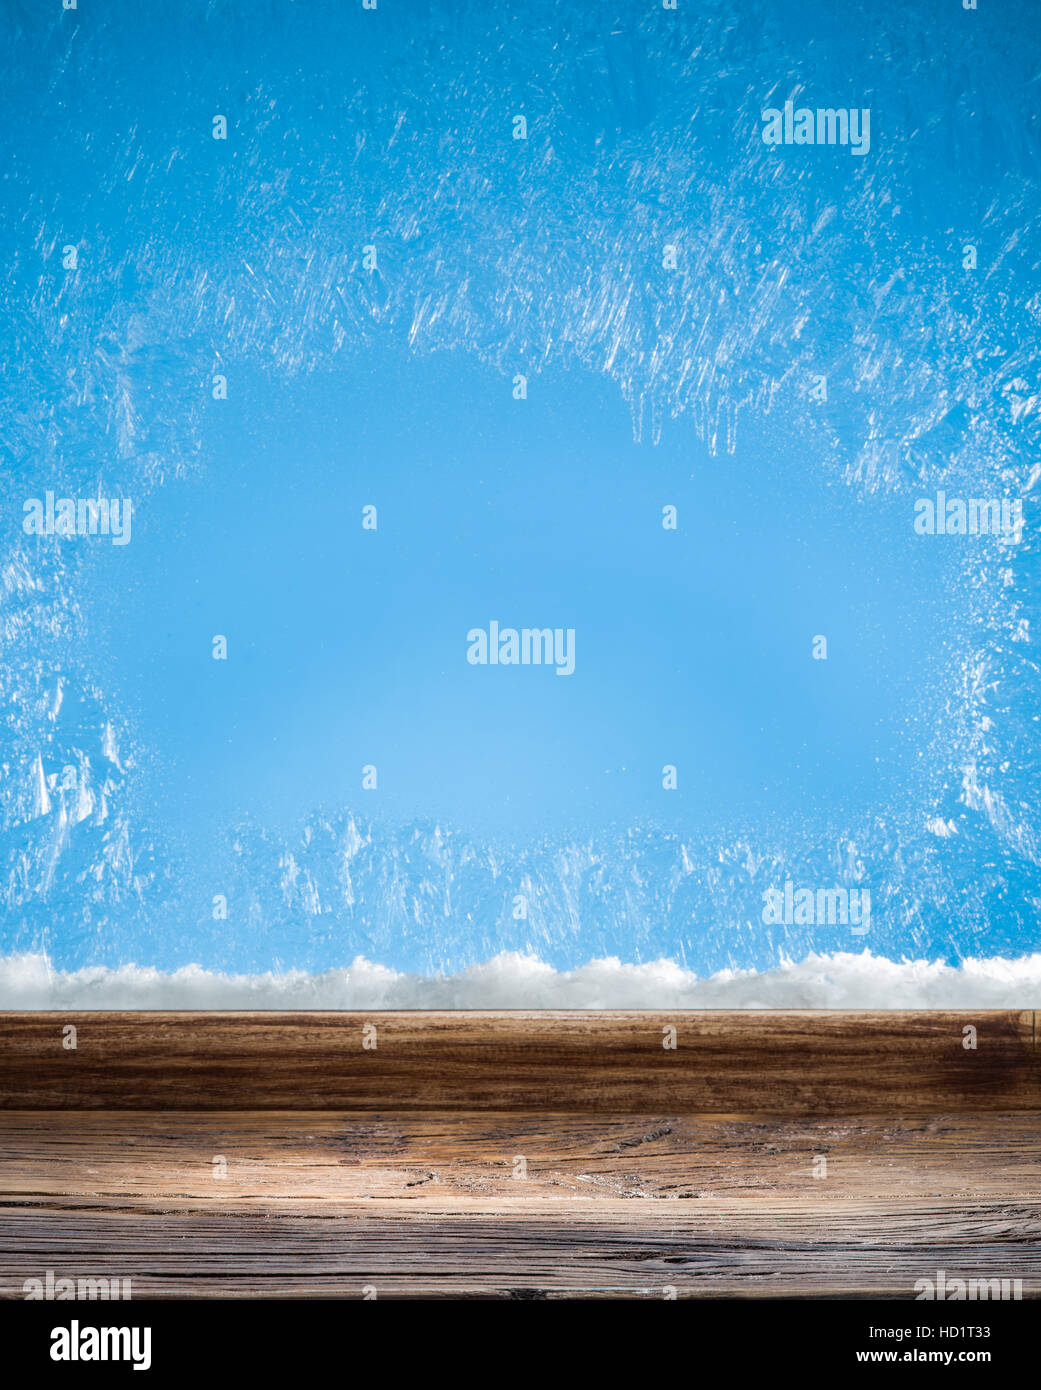 Wooden sill and frozen window. Christmas or New Year background. Stock Photo